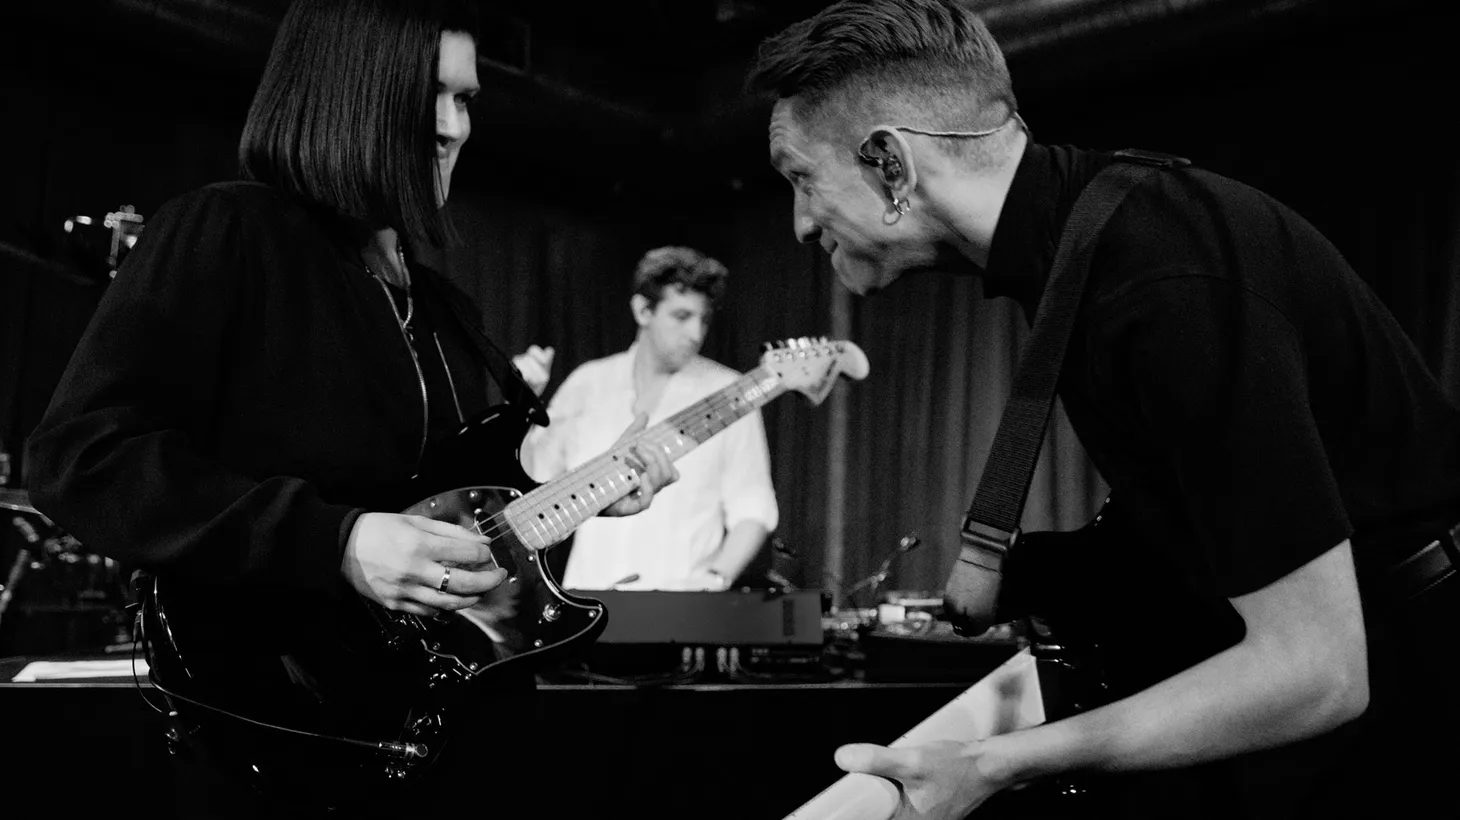 The trio behind The xx have been playing music together since they were teenagers and have sold millions of records. On I See You, they step boldly into the limelight and we share highlights of a recent live session recorded at Apogee studio.